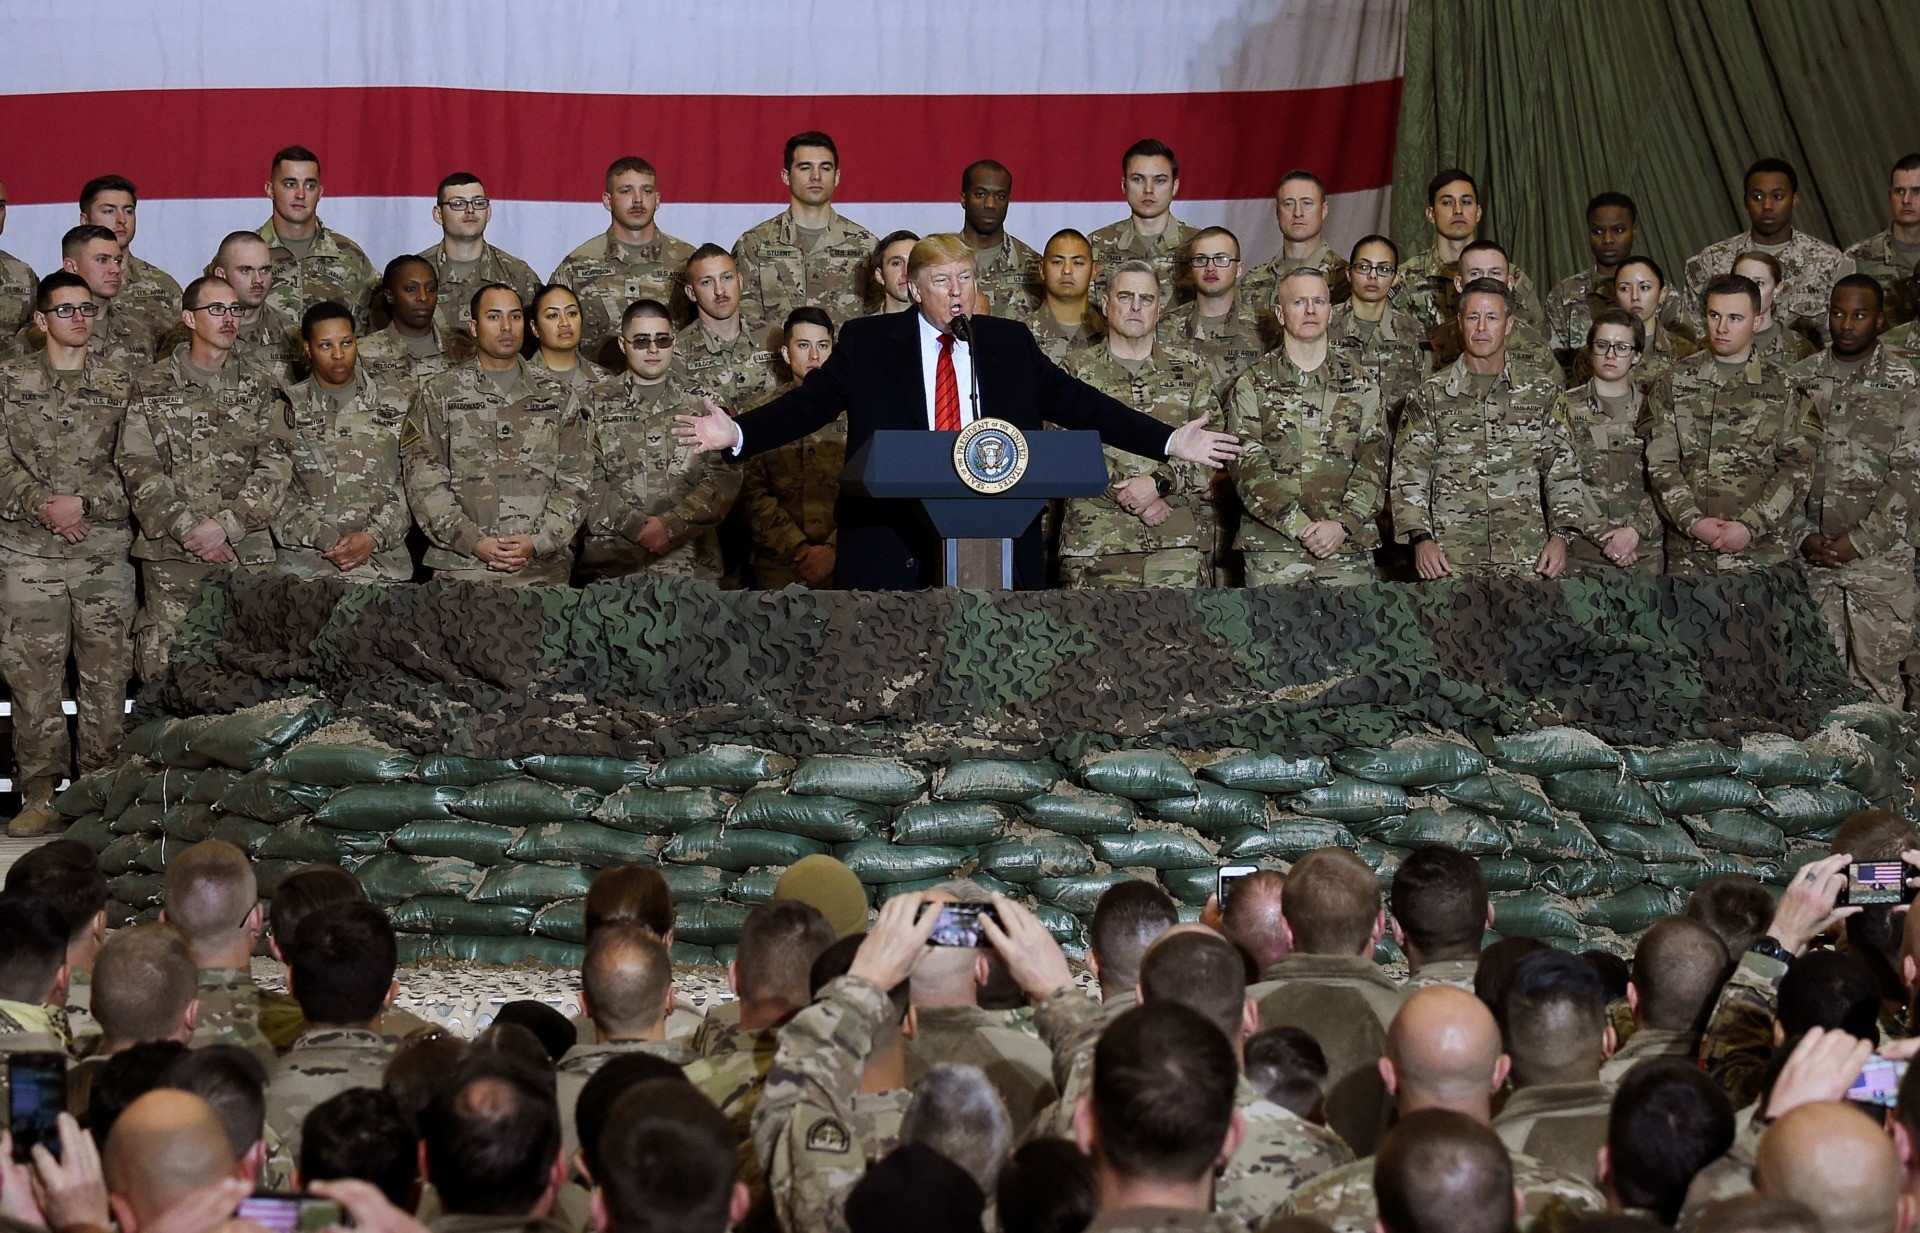 (FILES) In this file photo taken on November 28, 2019, US President Donald Trump speaks to the troops during a surprise Thanksgiving day visit at Bagram Air Field in Afghanistan. - President Donald Trump has shattered through norms and niceties on the world stage in his nearly three years in office. Entering an election year, Trump is unlikely to slow down as he seeks what has largely eluded him -- a headline-grabbing victory. The tycoon turned president closes 2019 with a new stride after what was perhaps his most unambiguous achievement -- US commandos' raid that killed the leader of the Islamic State extremist group. But the year was also full of tosses and turns for Trump. On his ambition to end the war in Afghanistan, he startled Washington by inviting the Taliban to talks but then declared the talks dead before resuming them. (Photo by Olivier Douliery / AFP) (Photo by OLIVIER DOULIERY/AFP via Getty Images)